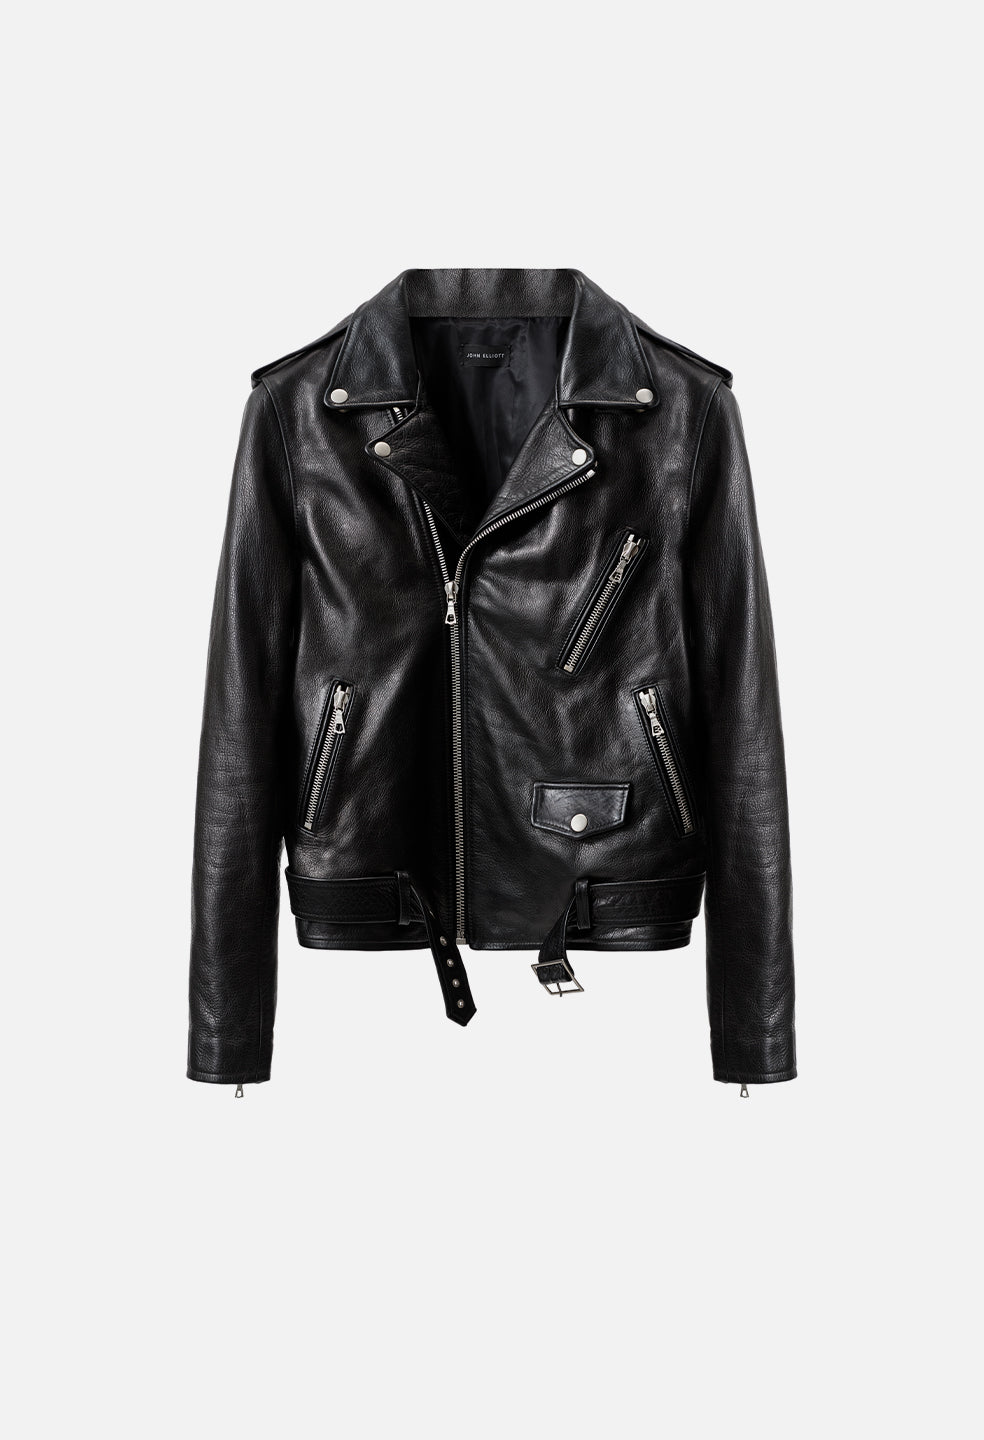 9 Cool Leather Jacket Outfits for Women - How to Wear a Leather Jacket